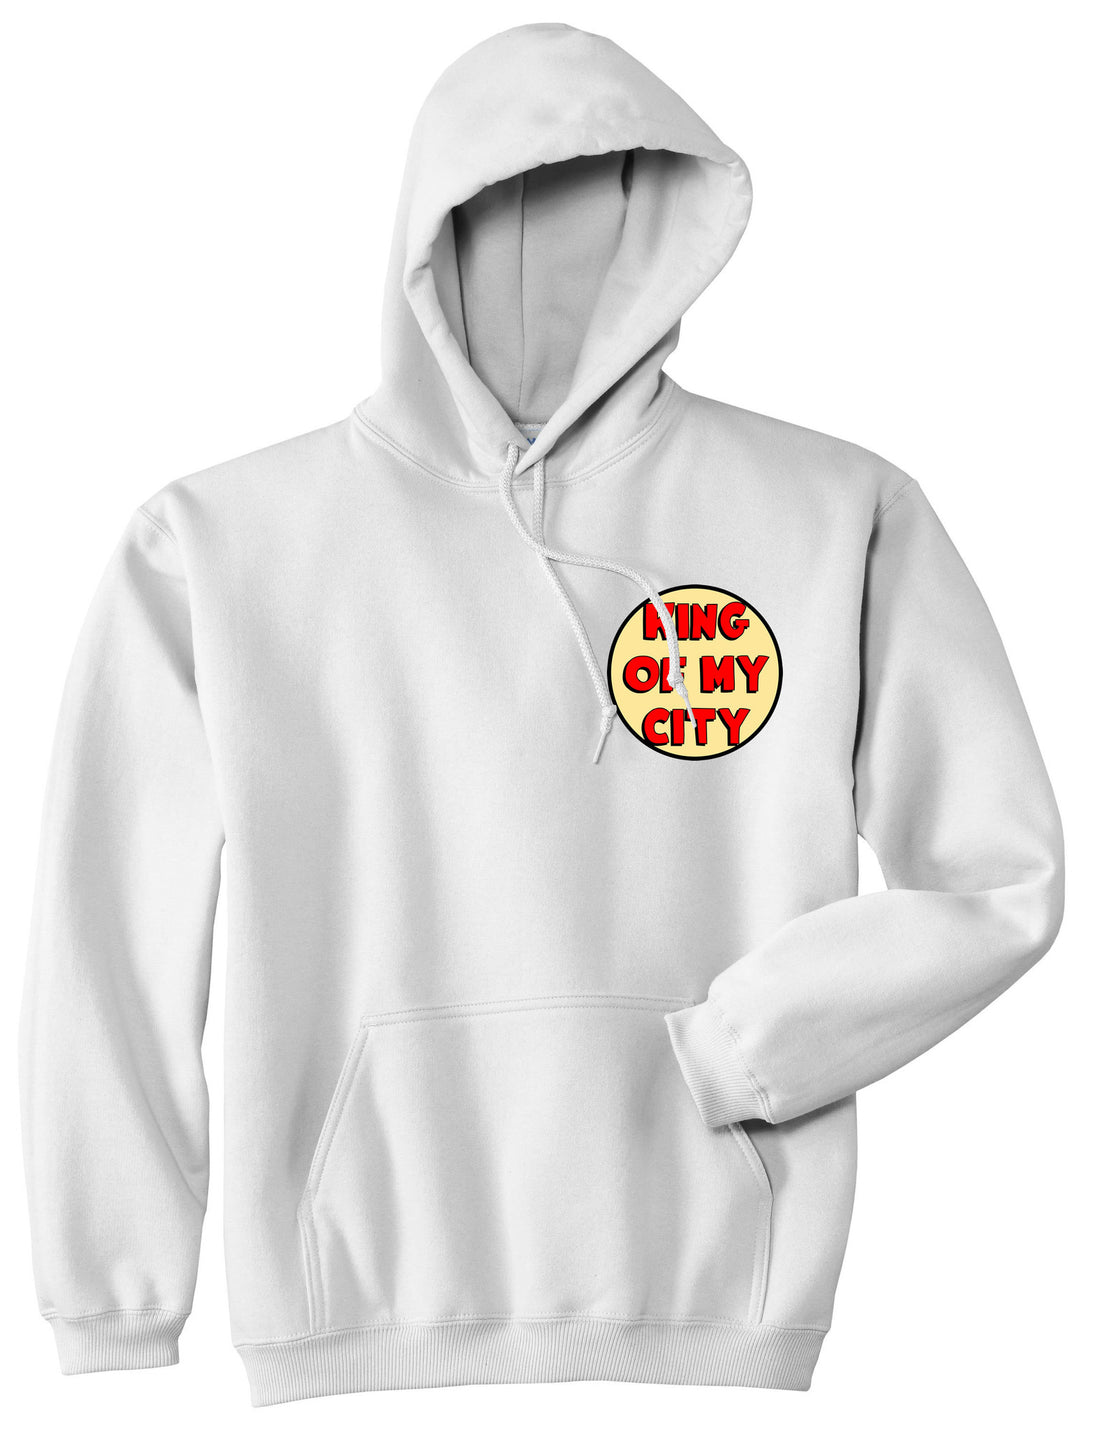 King Of My City Chest Logo Boys Kids Pullover Hoodie Hoody in White by Kings Of NY